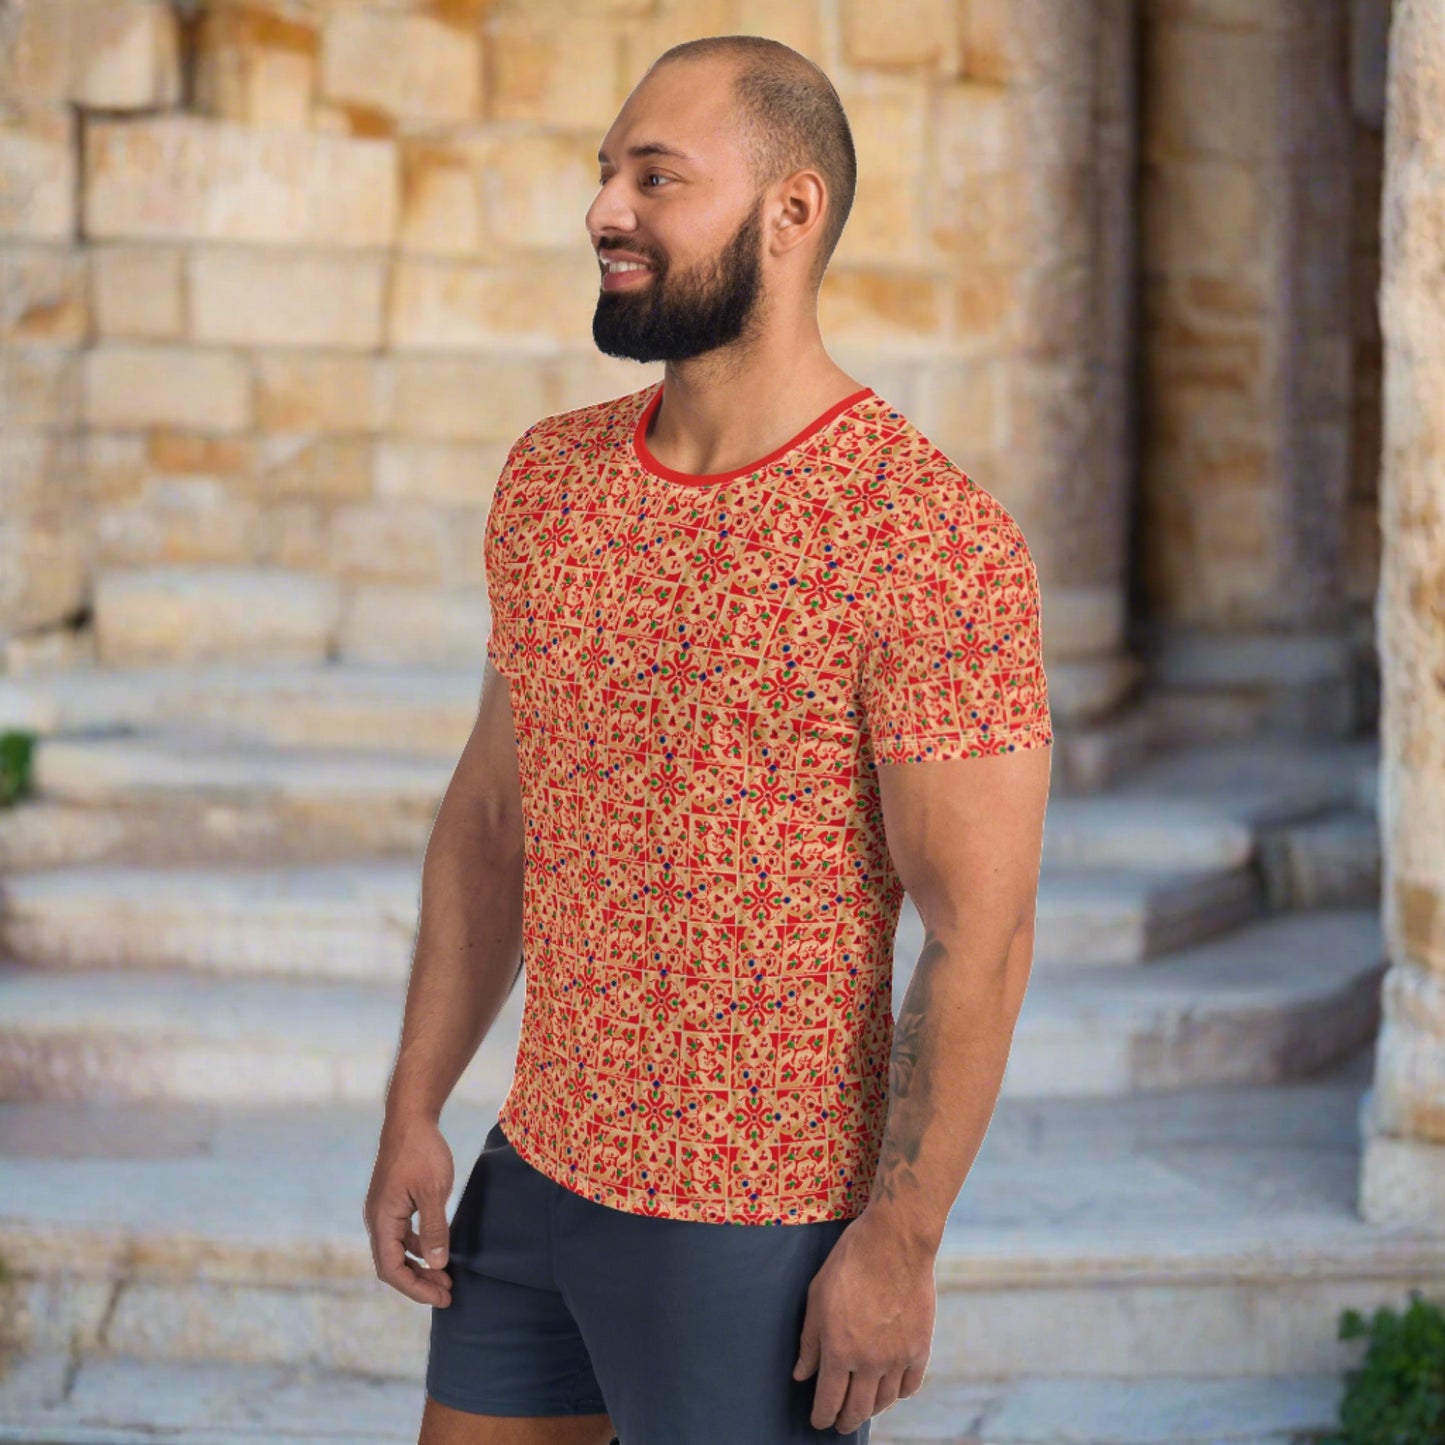 Our Constantinople Sport Shirt. It is the perfect compliment to our Constantinople Swim Brief.